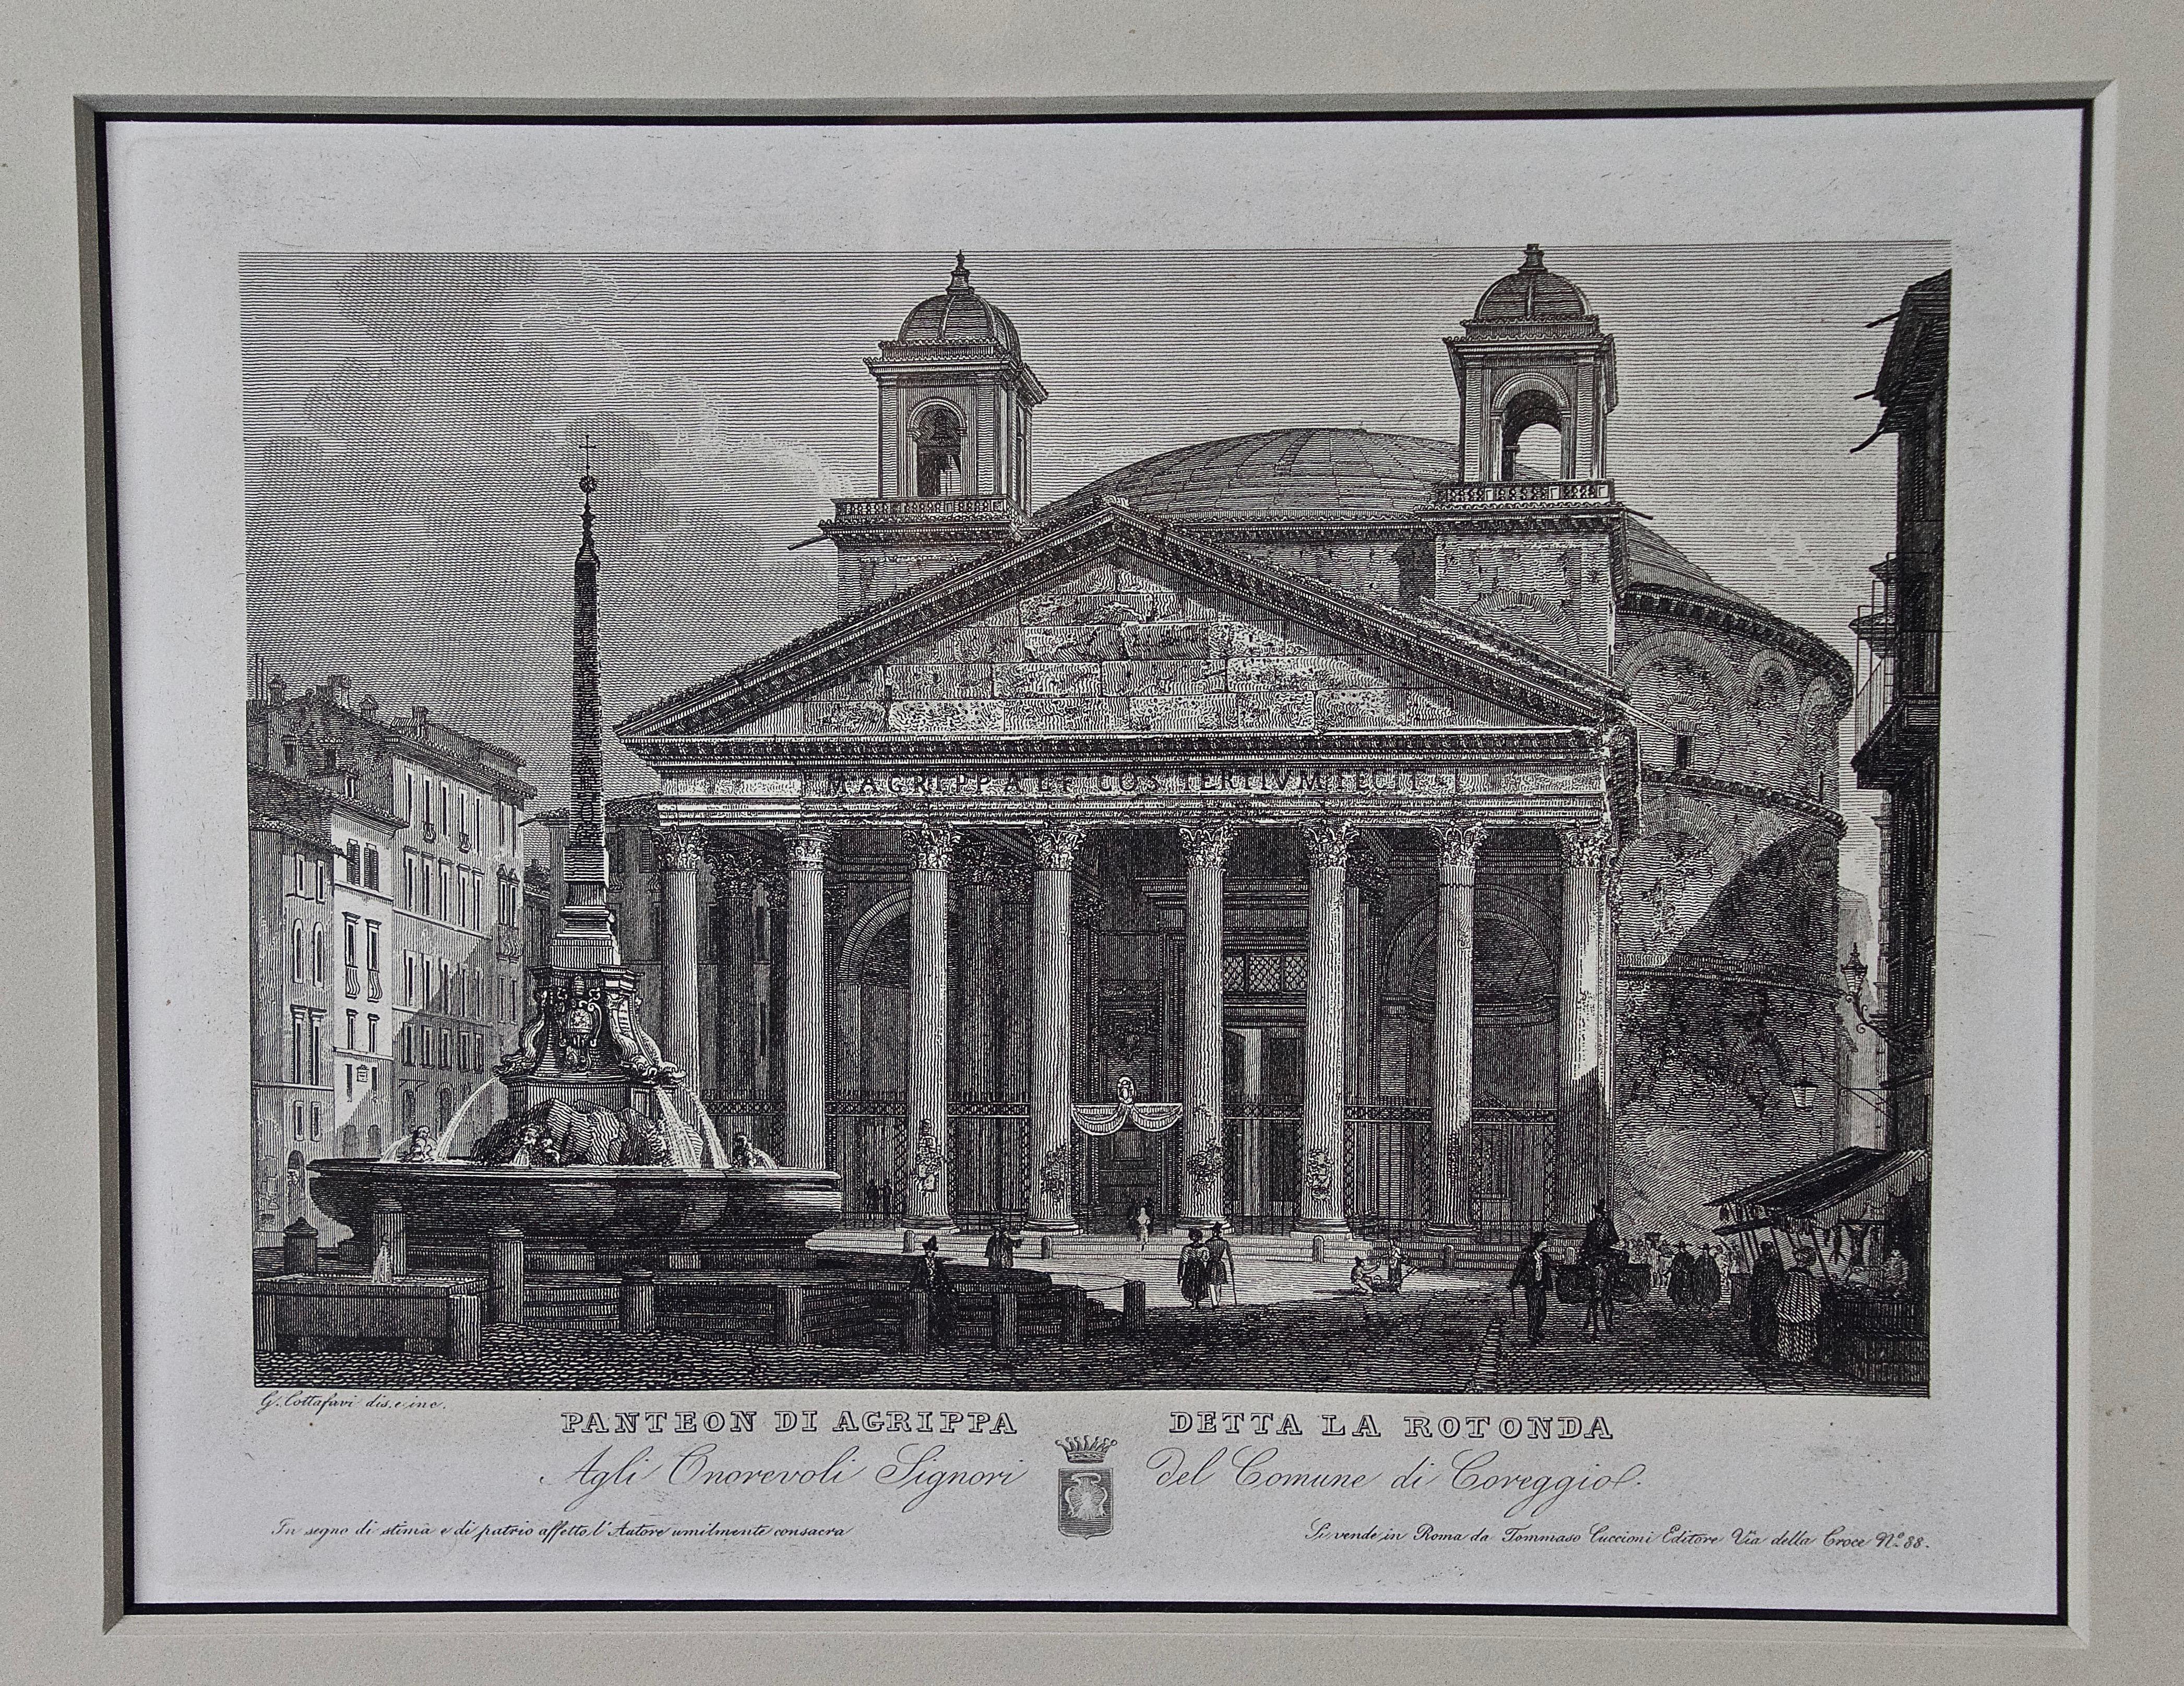 Gaetano Cottafavi Landscape Print - The Pantheon in Rome: A 19th Century Etching by Cottafavi